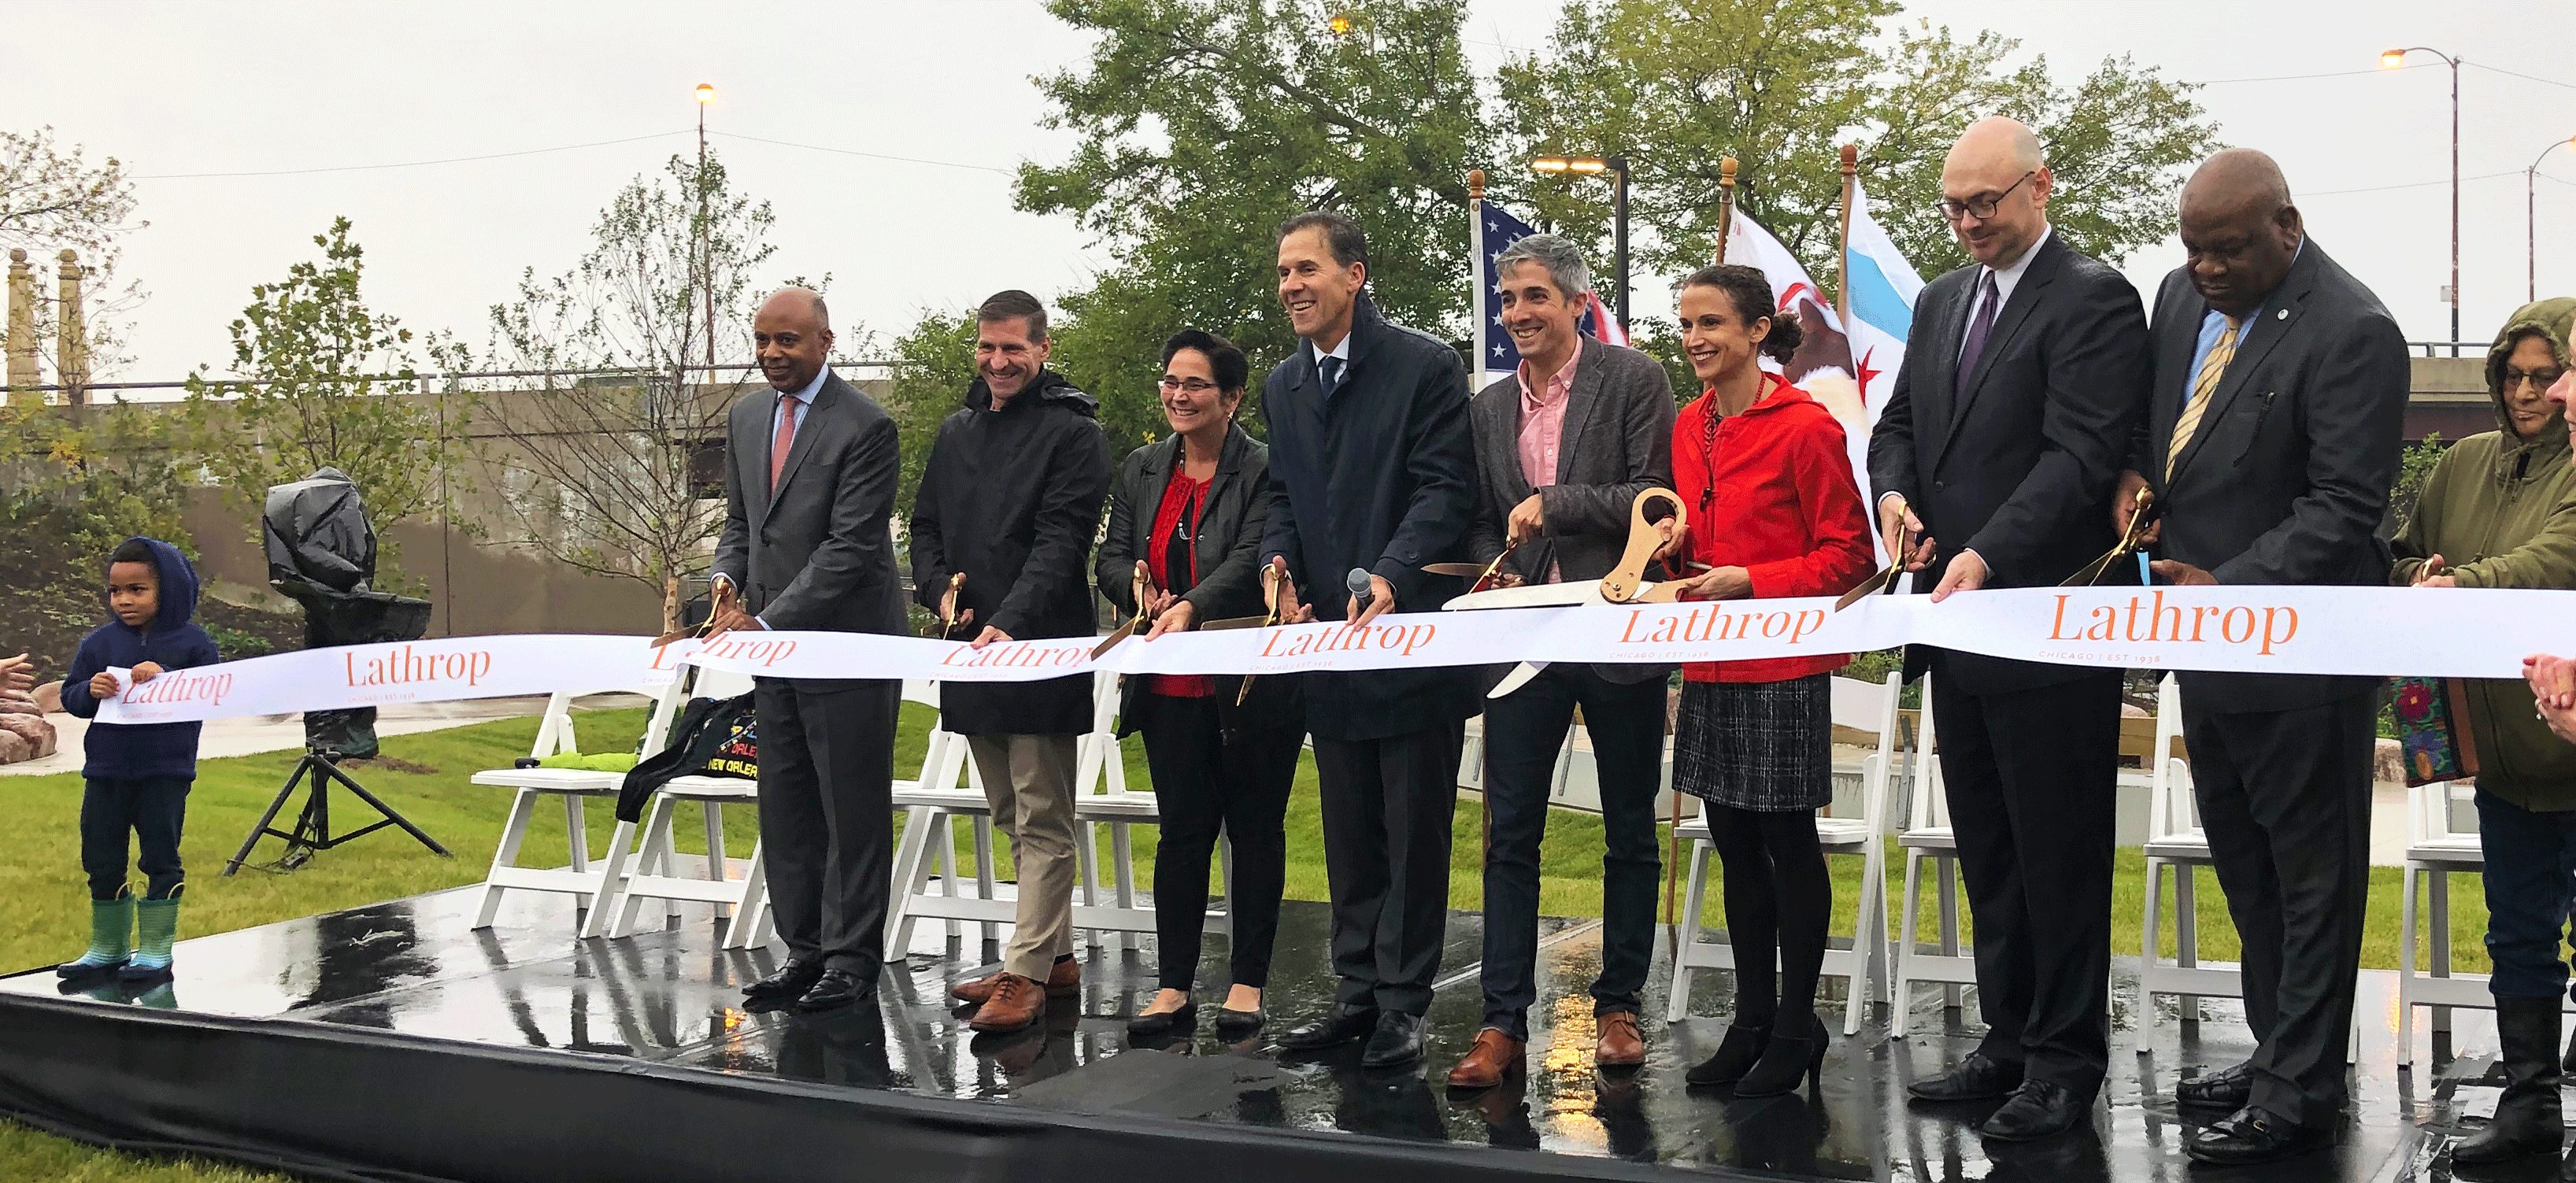 Lathrop Homes and Landscape Project Celebrates Grand Opening Ribbon Cutting Ceremony